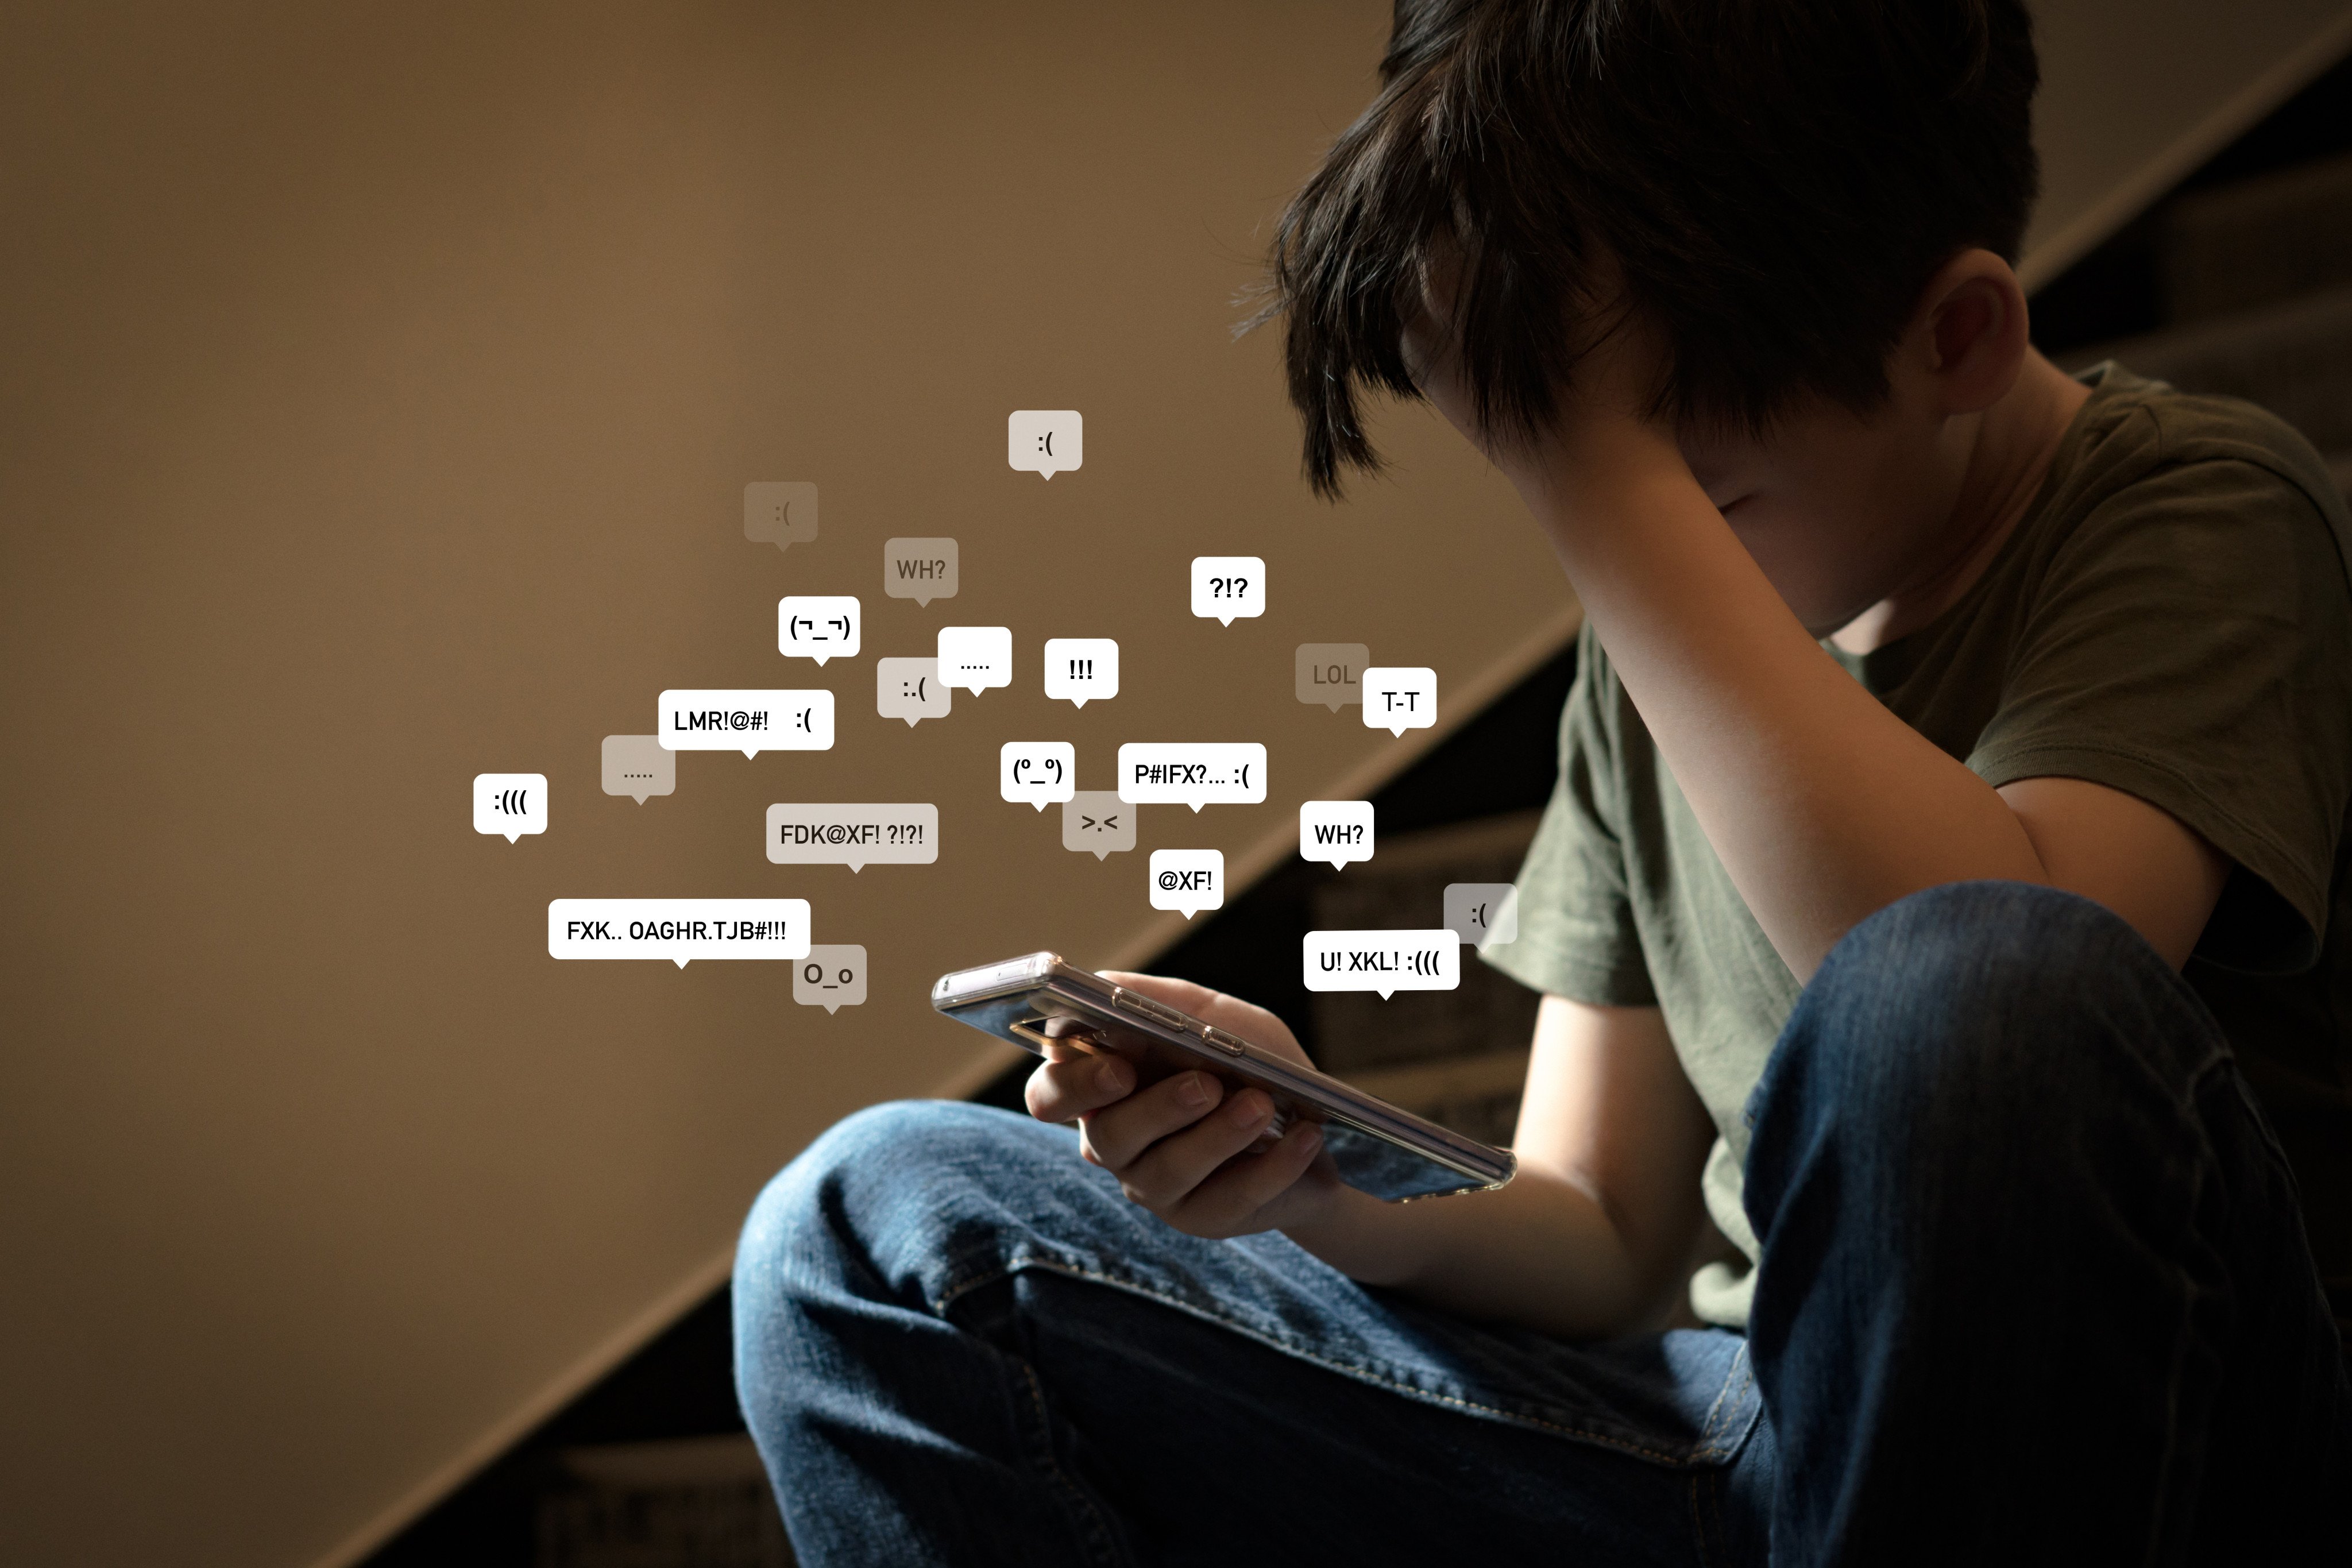 A Hong Kong charity has called for more prevention measures to combat cyberbullying. Photo: Shutterstock